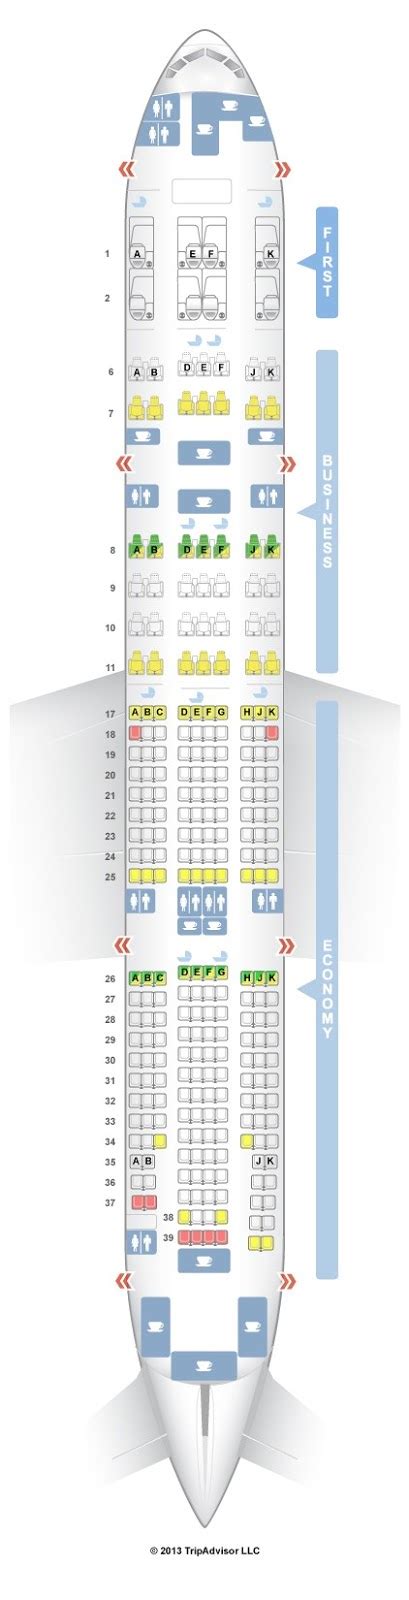 Best Of Boeing Seat Map